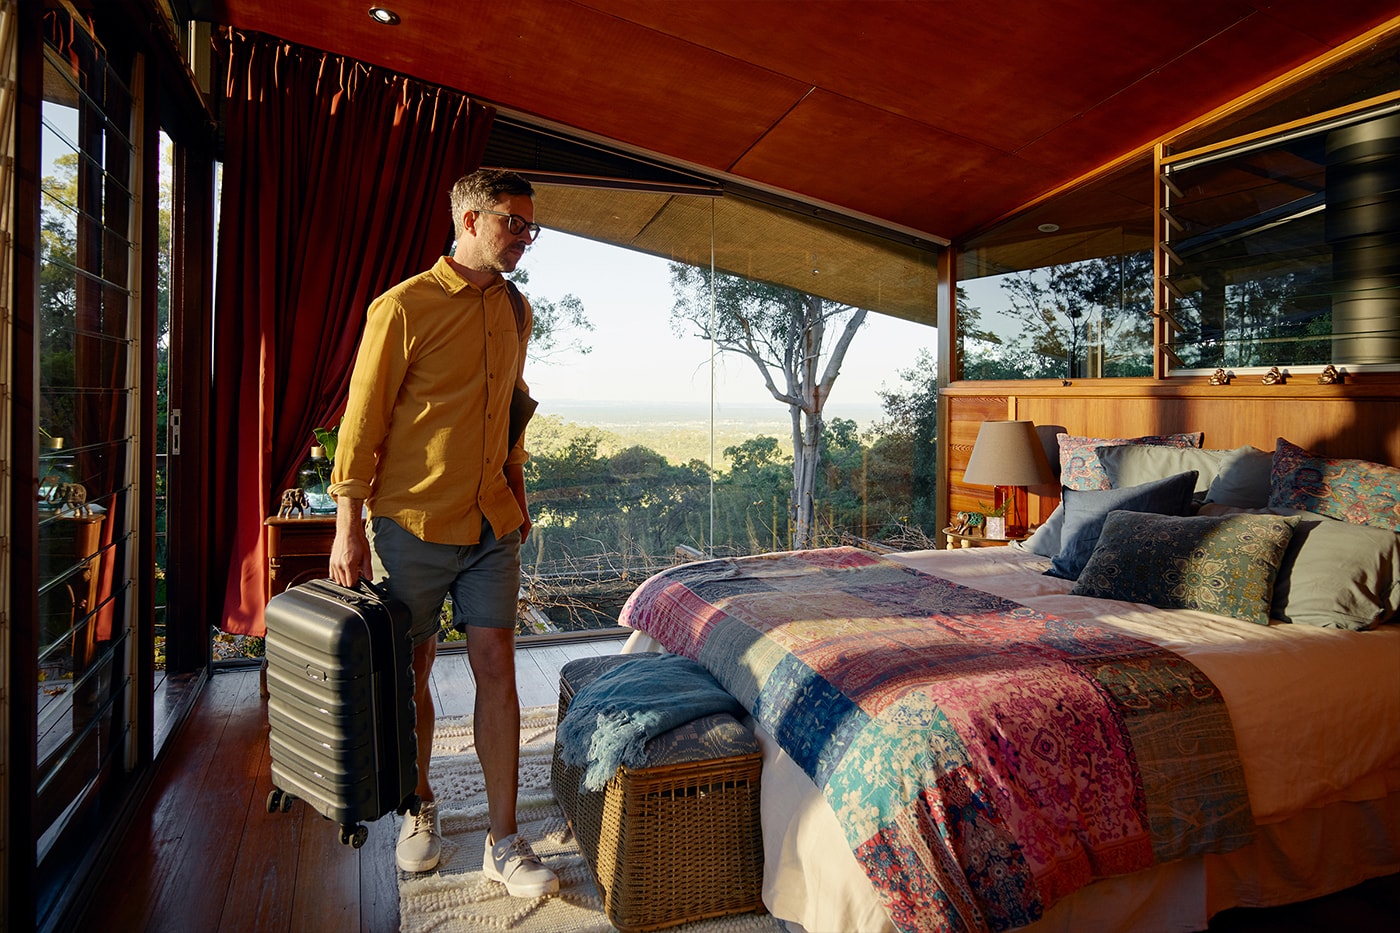 Airbnb to Sponsor 12 People to Live Anywhere for One Year Program "Live Anywhere on Airbnb"